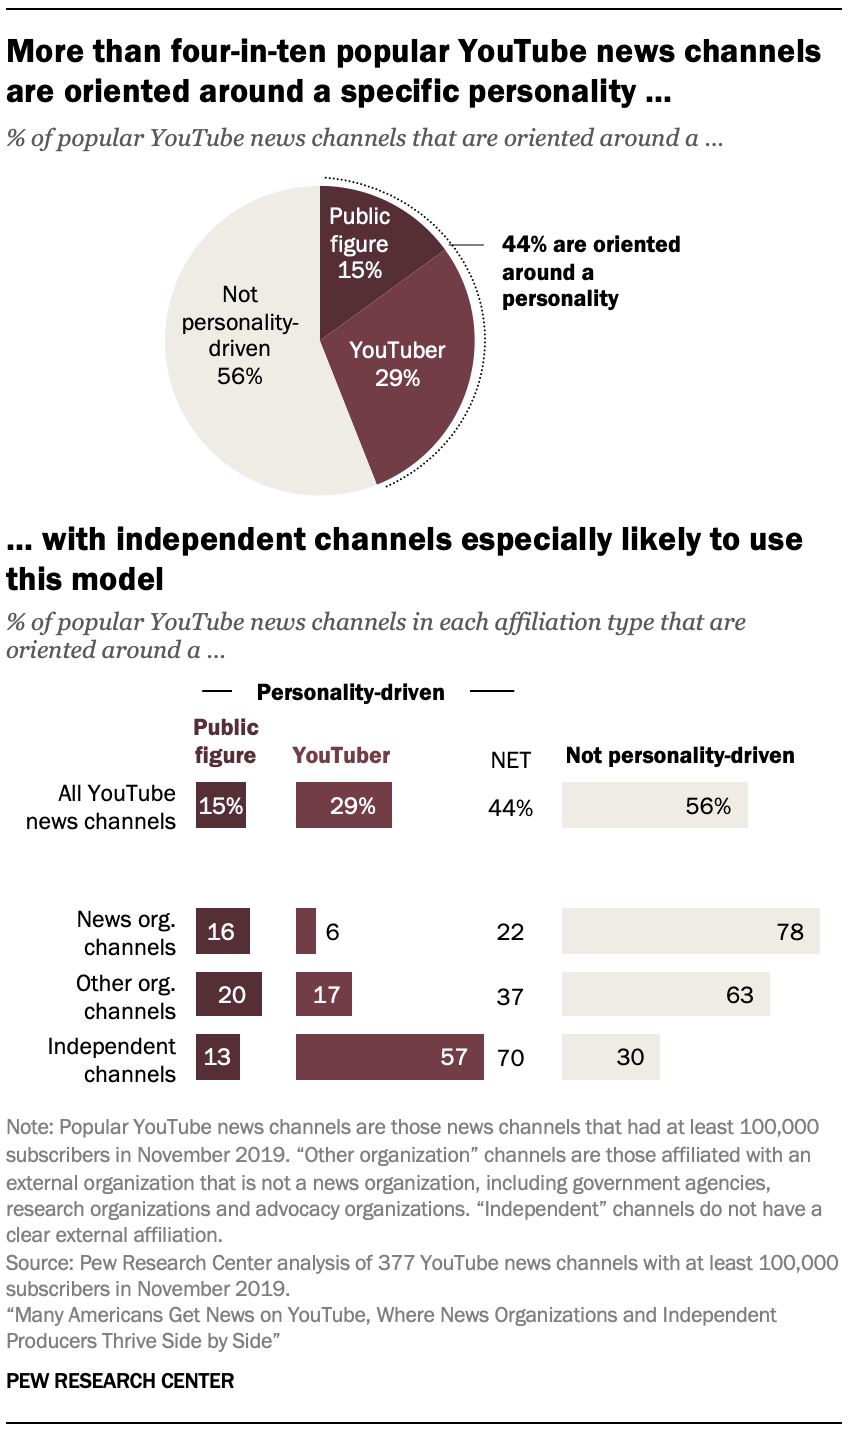 More than four-in-ten popular YouTube news channels are oriented around a specific personality … with independent channels especially likely to use this model